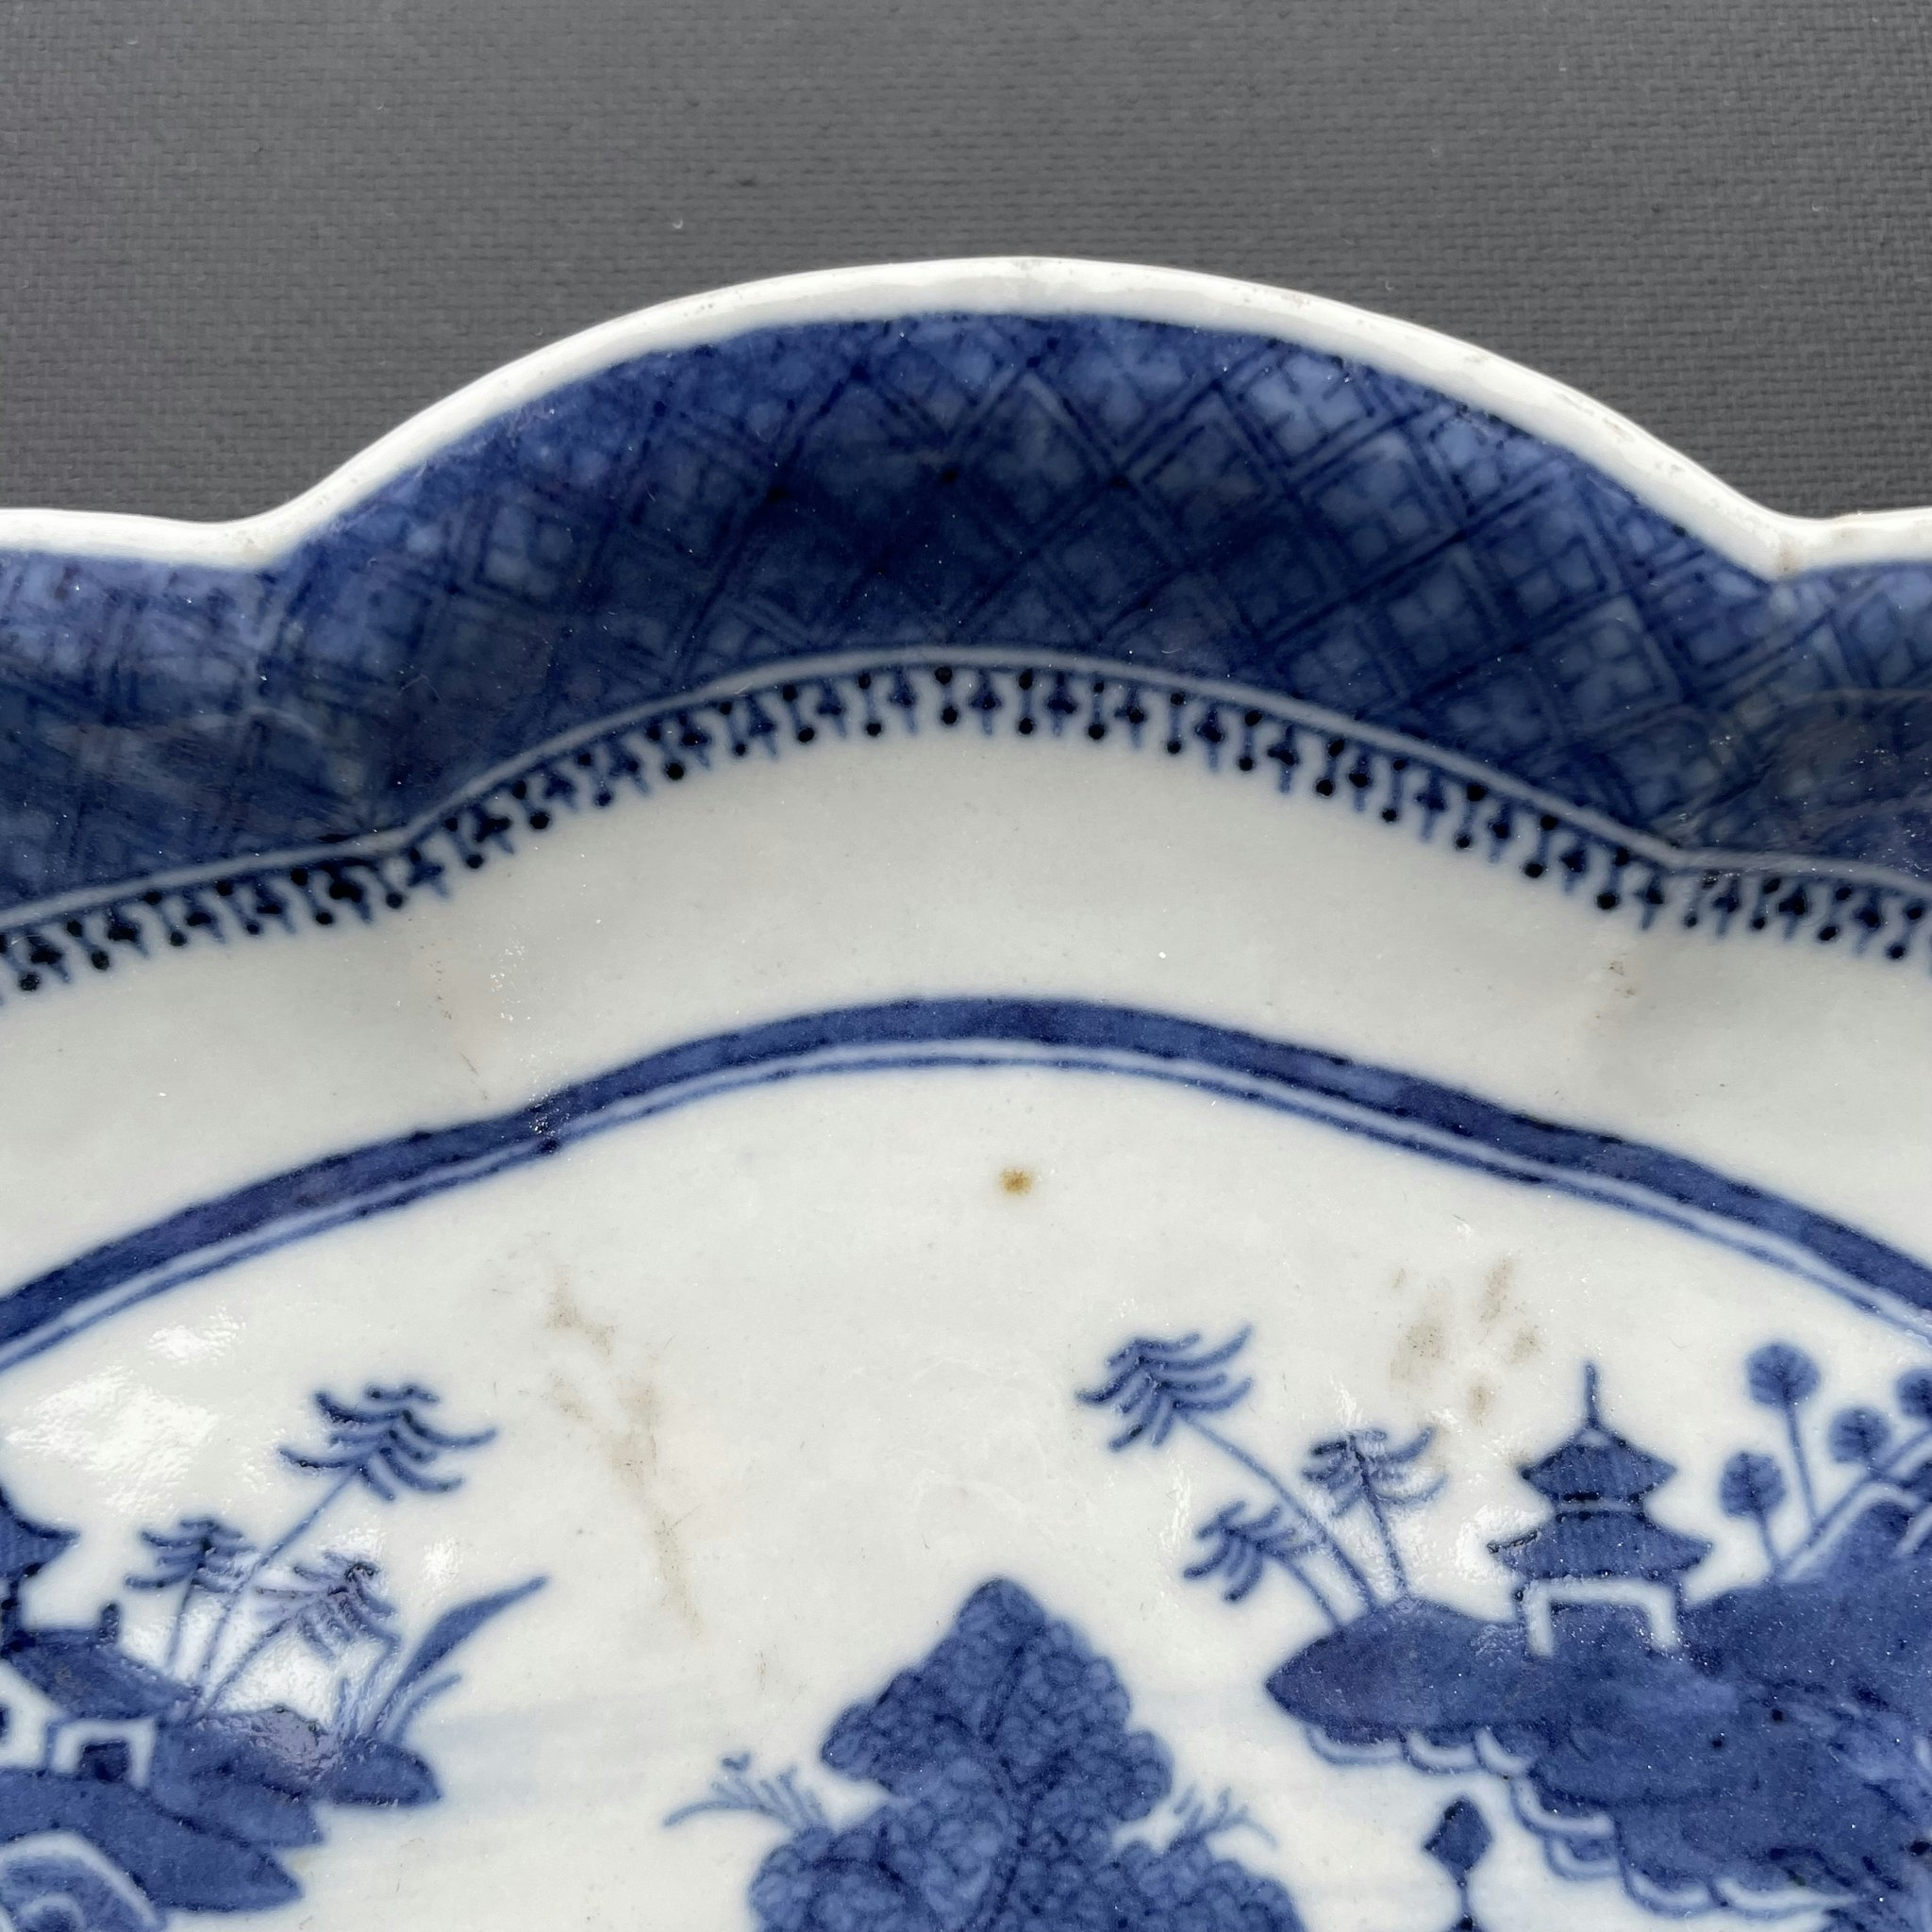 Chinese Antique porcelain blue and white deep platter, 19th c # 1471